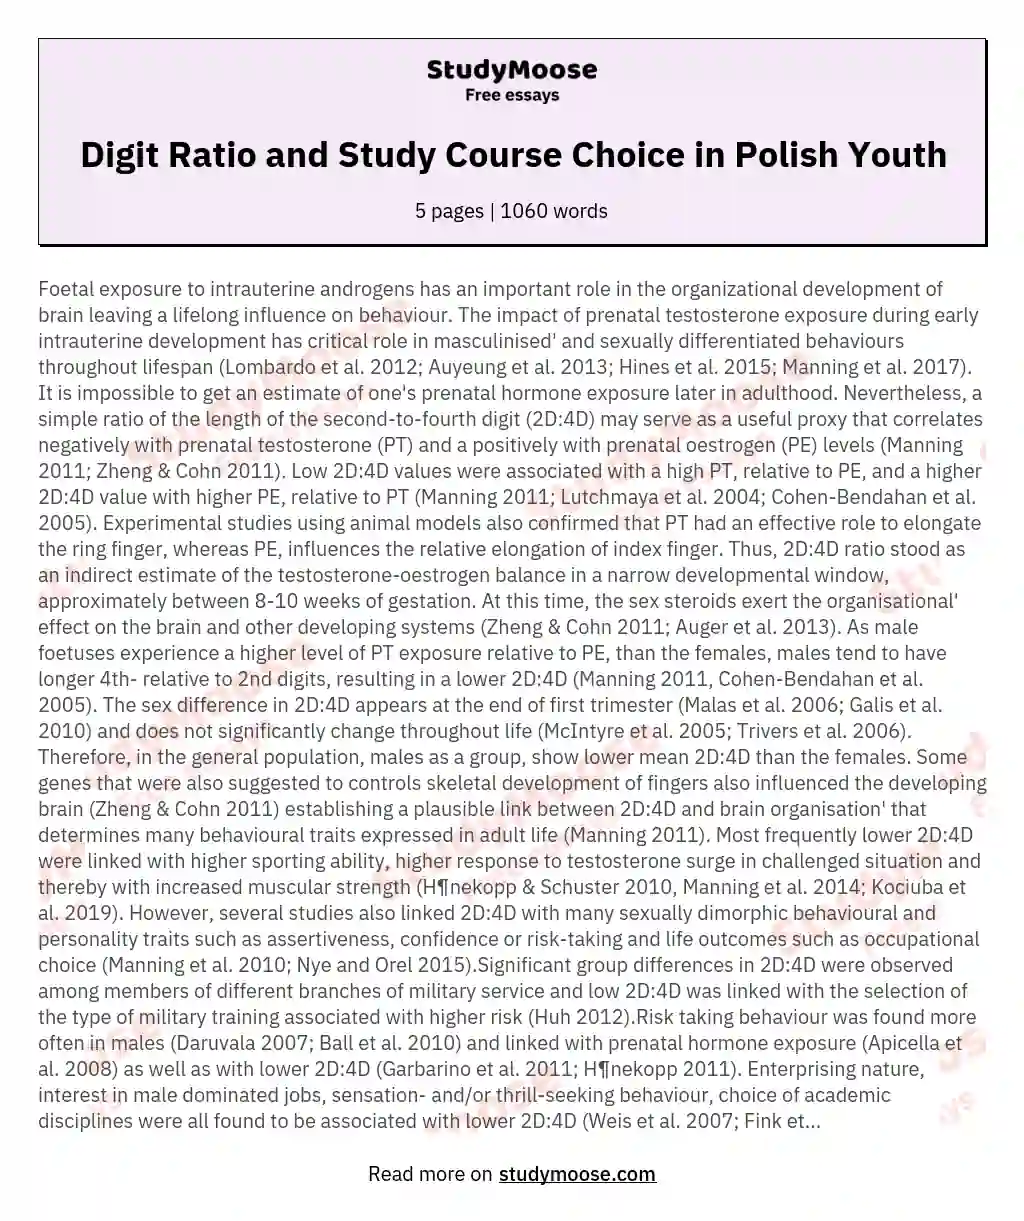 Is digit ratio (2D:4D) associated with the choice for the uniformed versus a civil study course by the Polish youth?